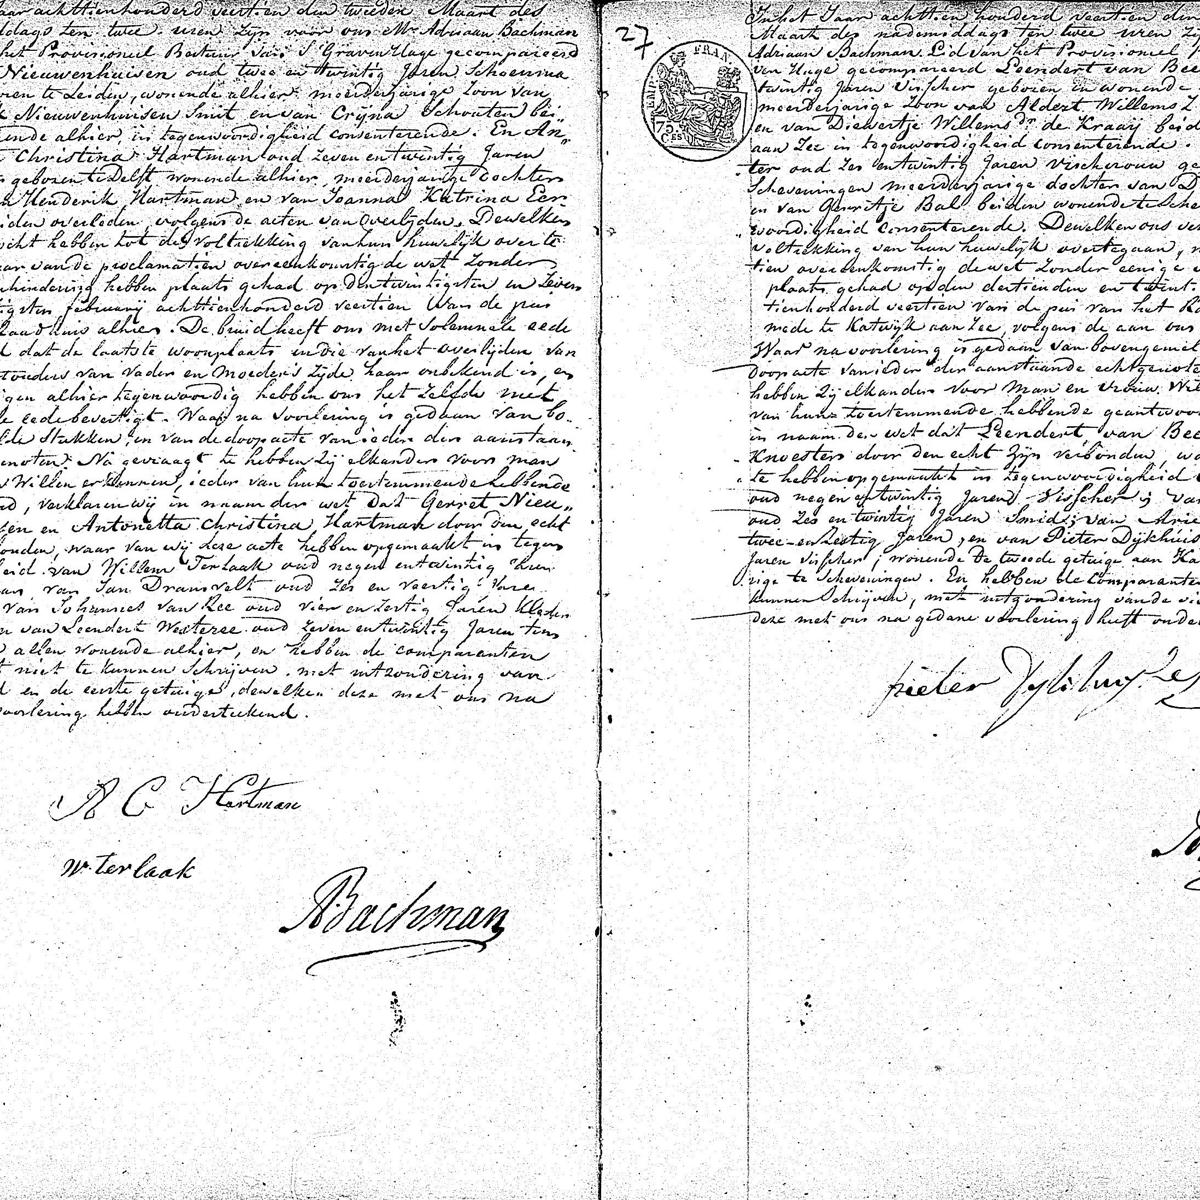 Civil registry of marriages, Den Haag, 1814, records 26a-27